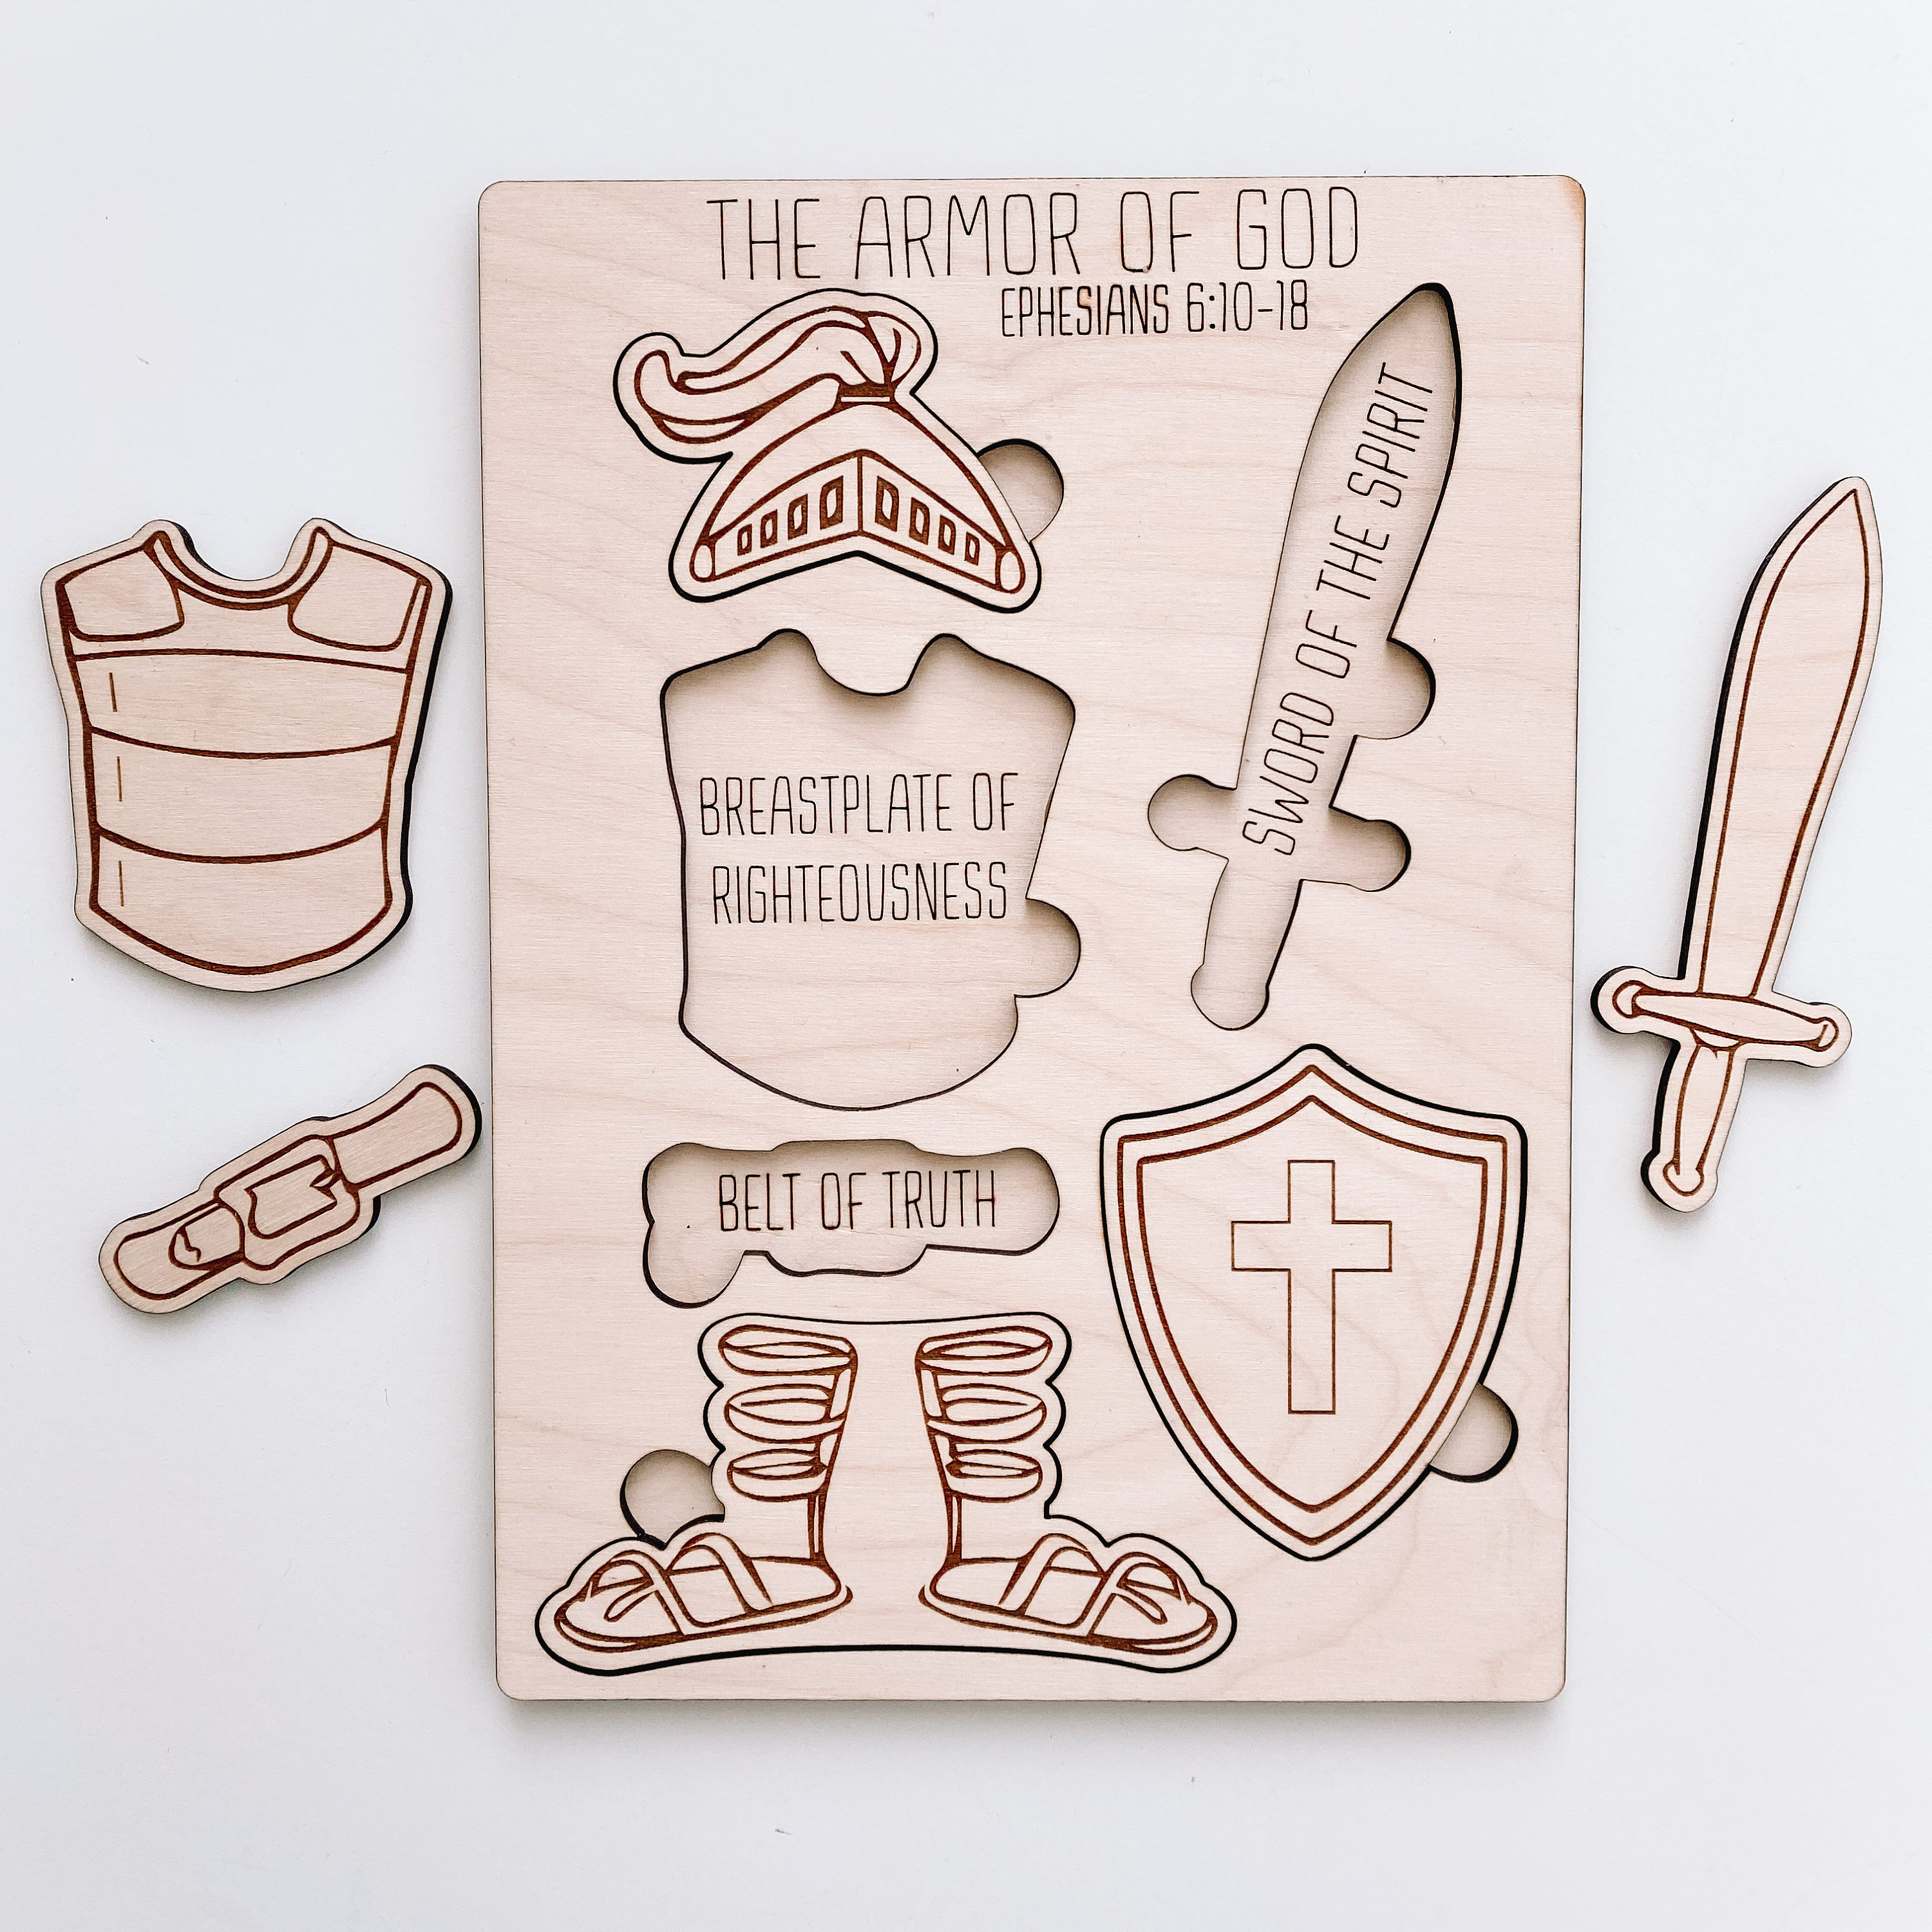 Put On The Full Armor Of God Personalized Christian Gifts for Men, Tee -  Pink Posies and Pearls